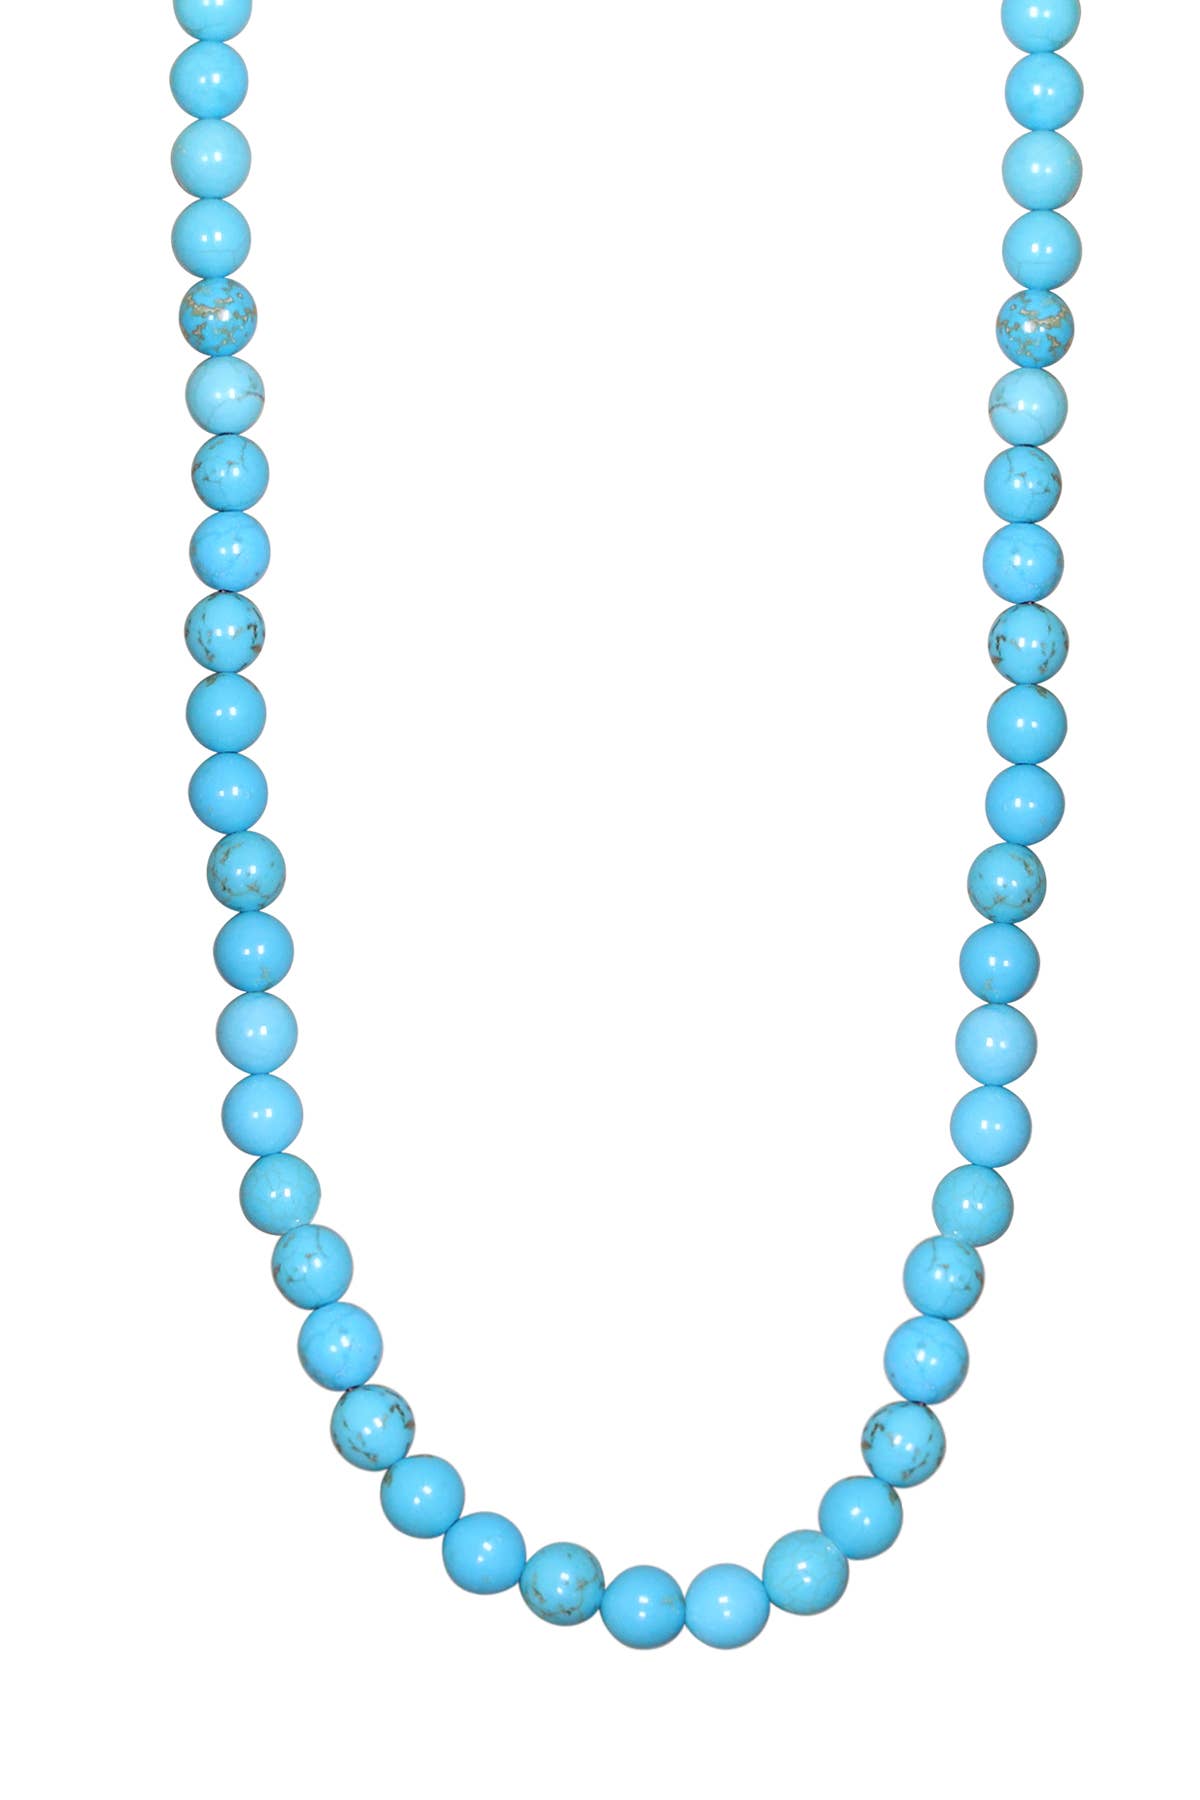 Sterling Silver & Turquoise Mala Beads Necklace - SS